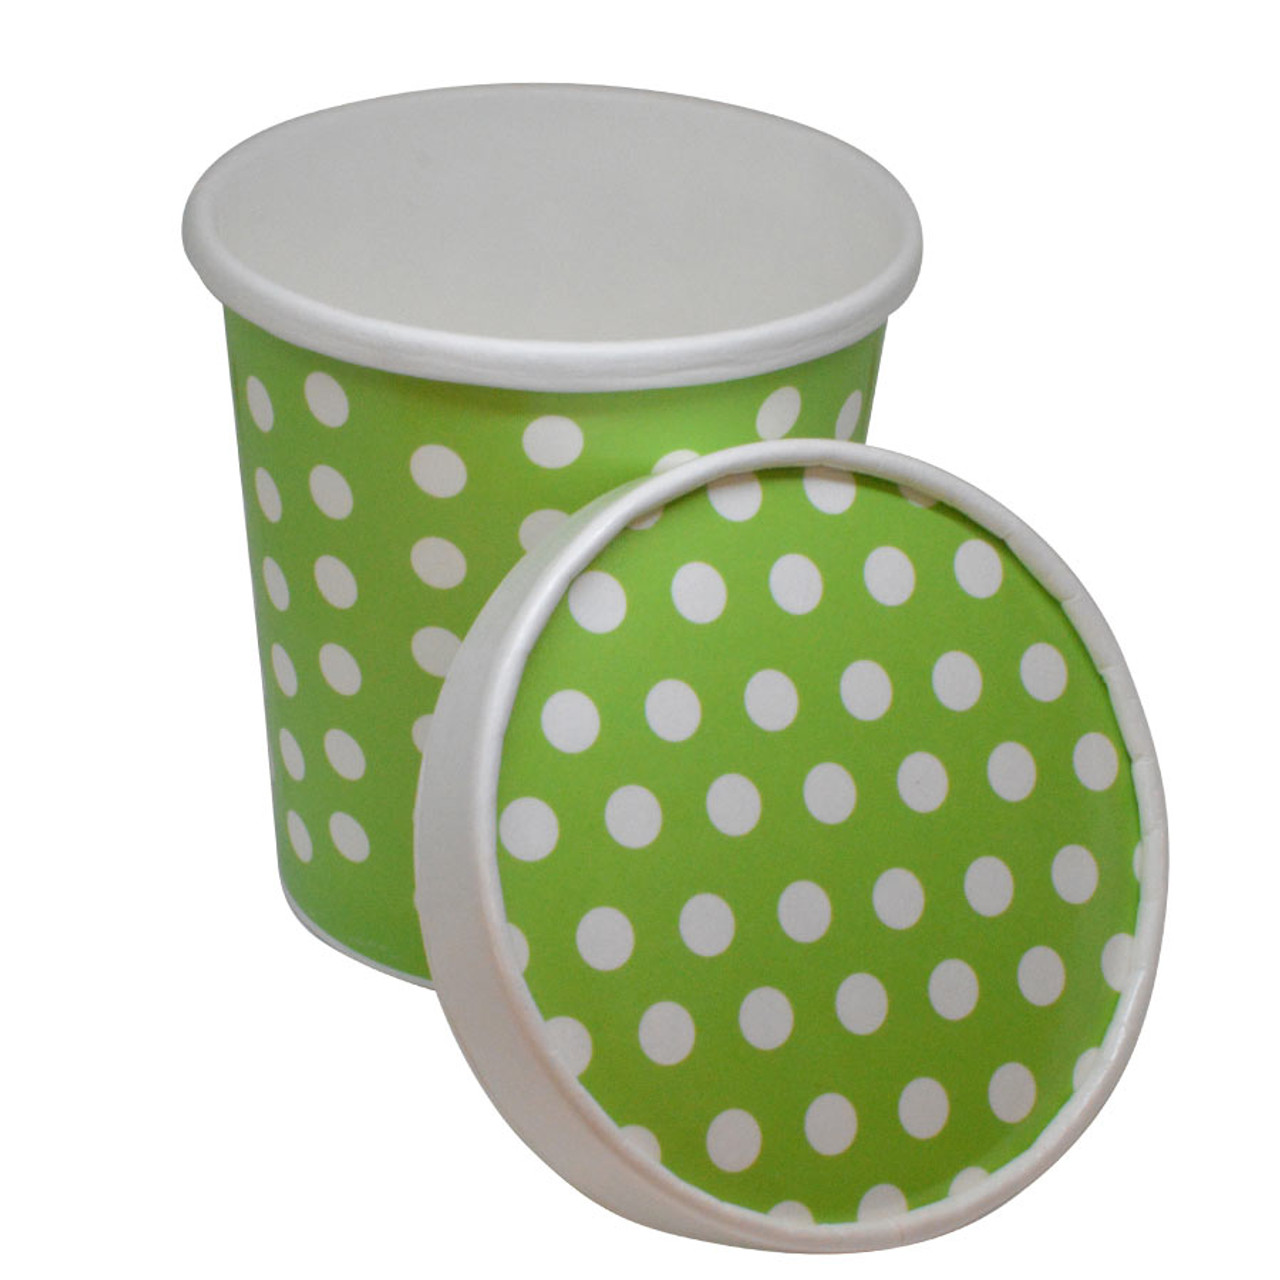 16oz RED Polka Dot PINT containers with non-vented lids - Frozen Solutions